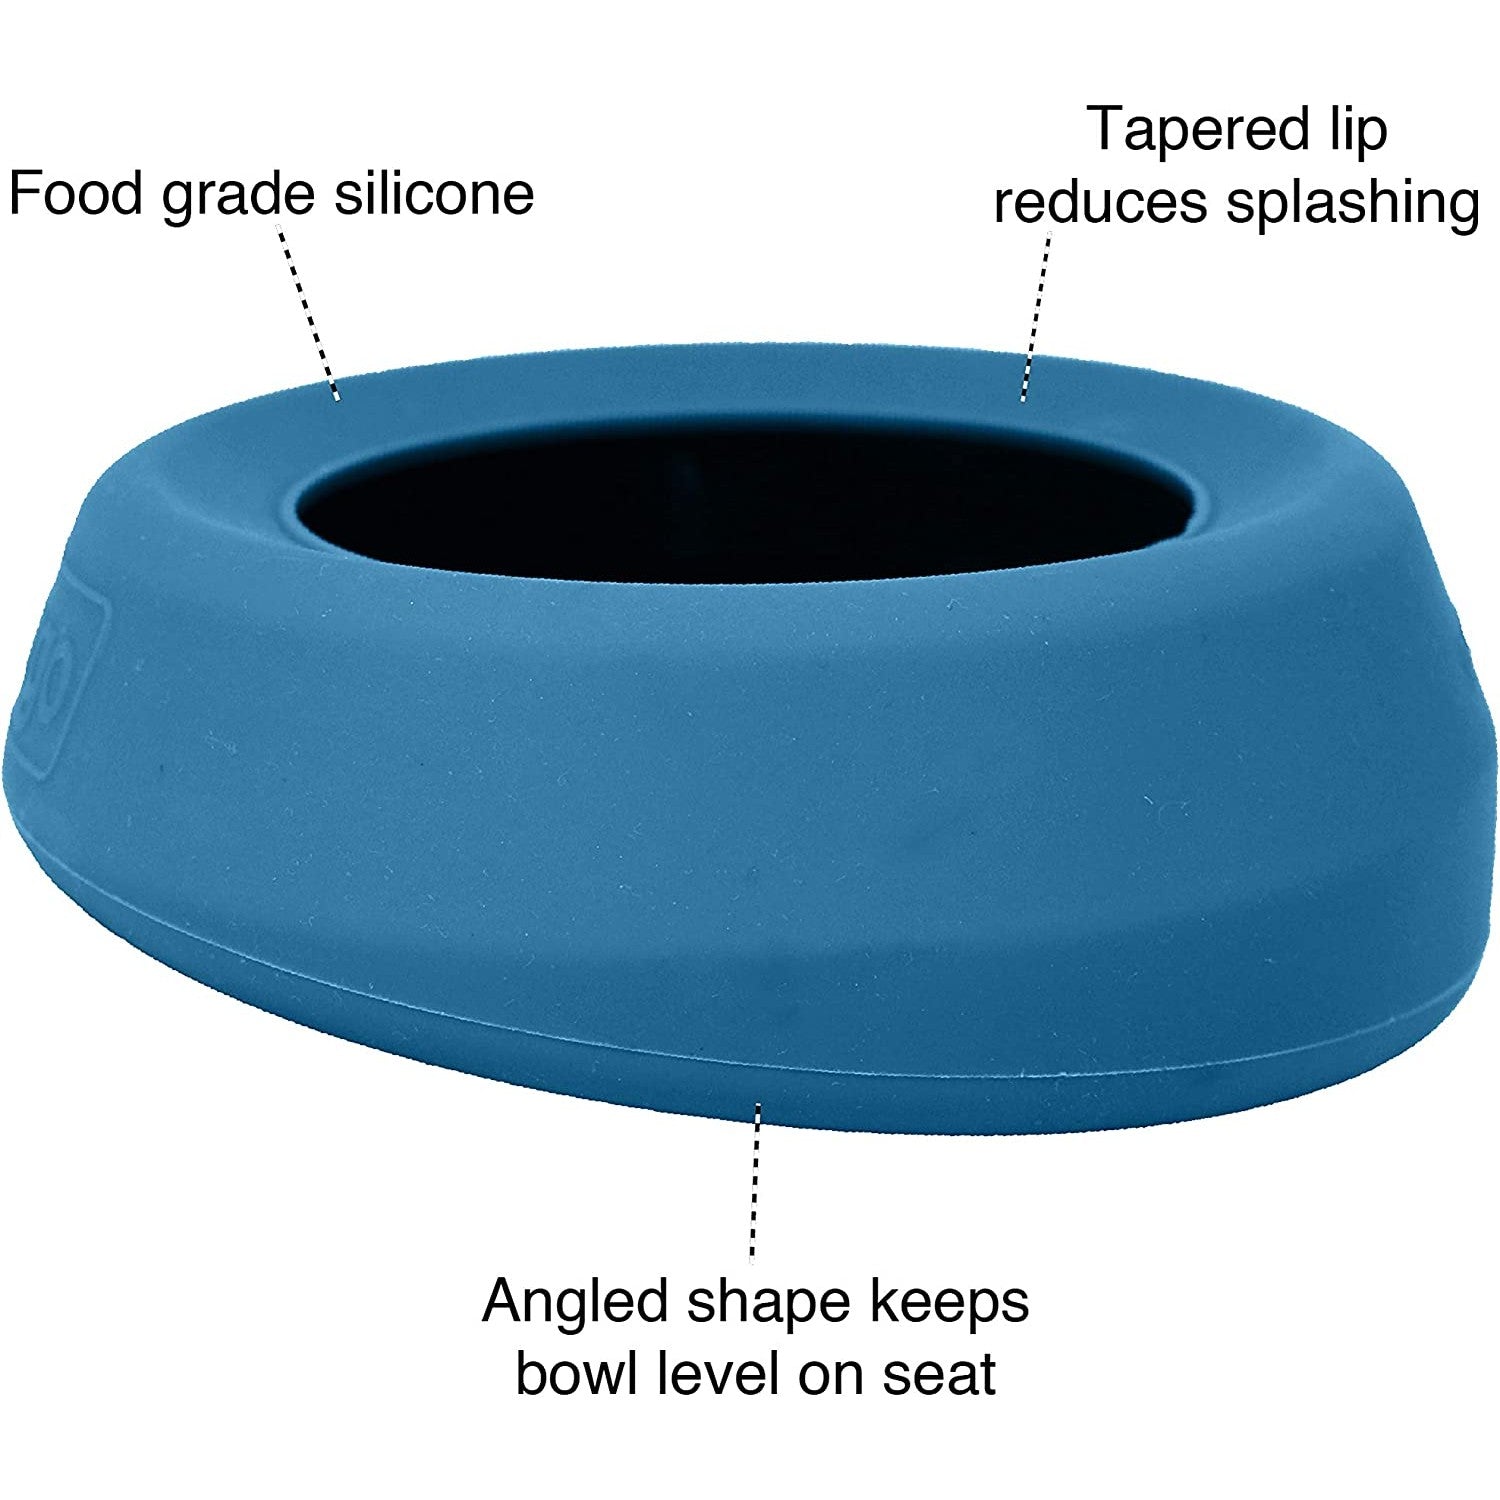 Product features of a no-spill travel dog bowl. Features include; food grade silicone, tapered lip to reduce splashing, angled shape to keep bowl level on seat.